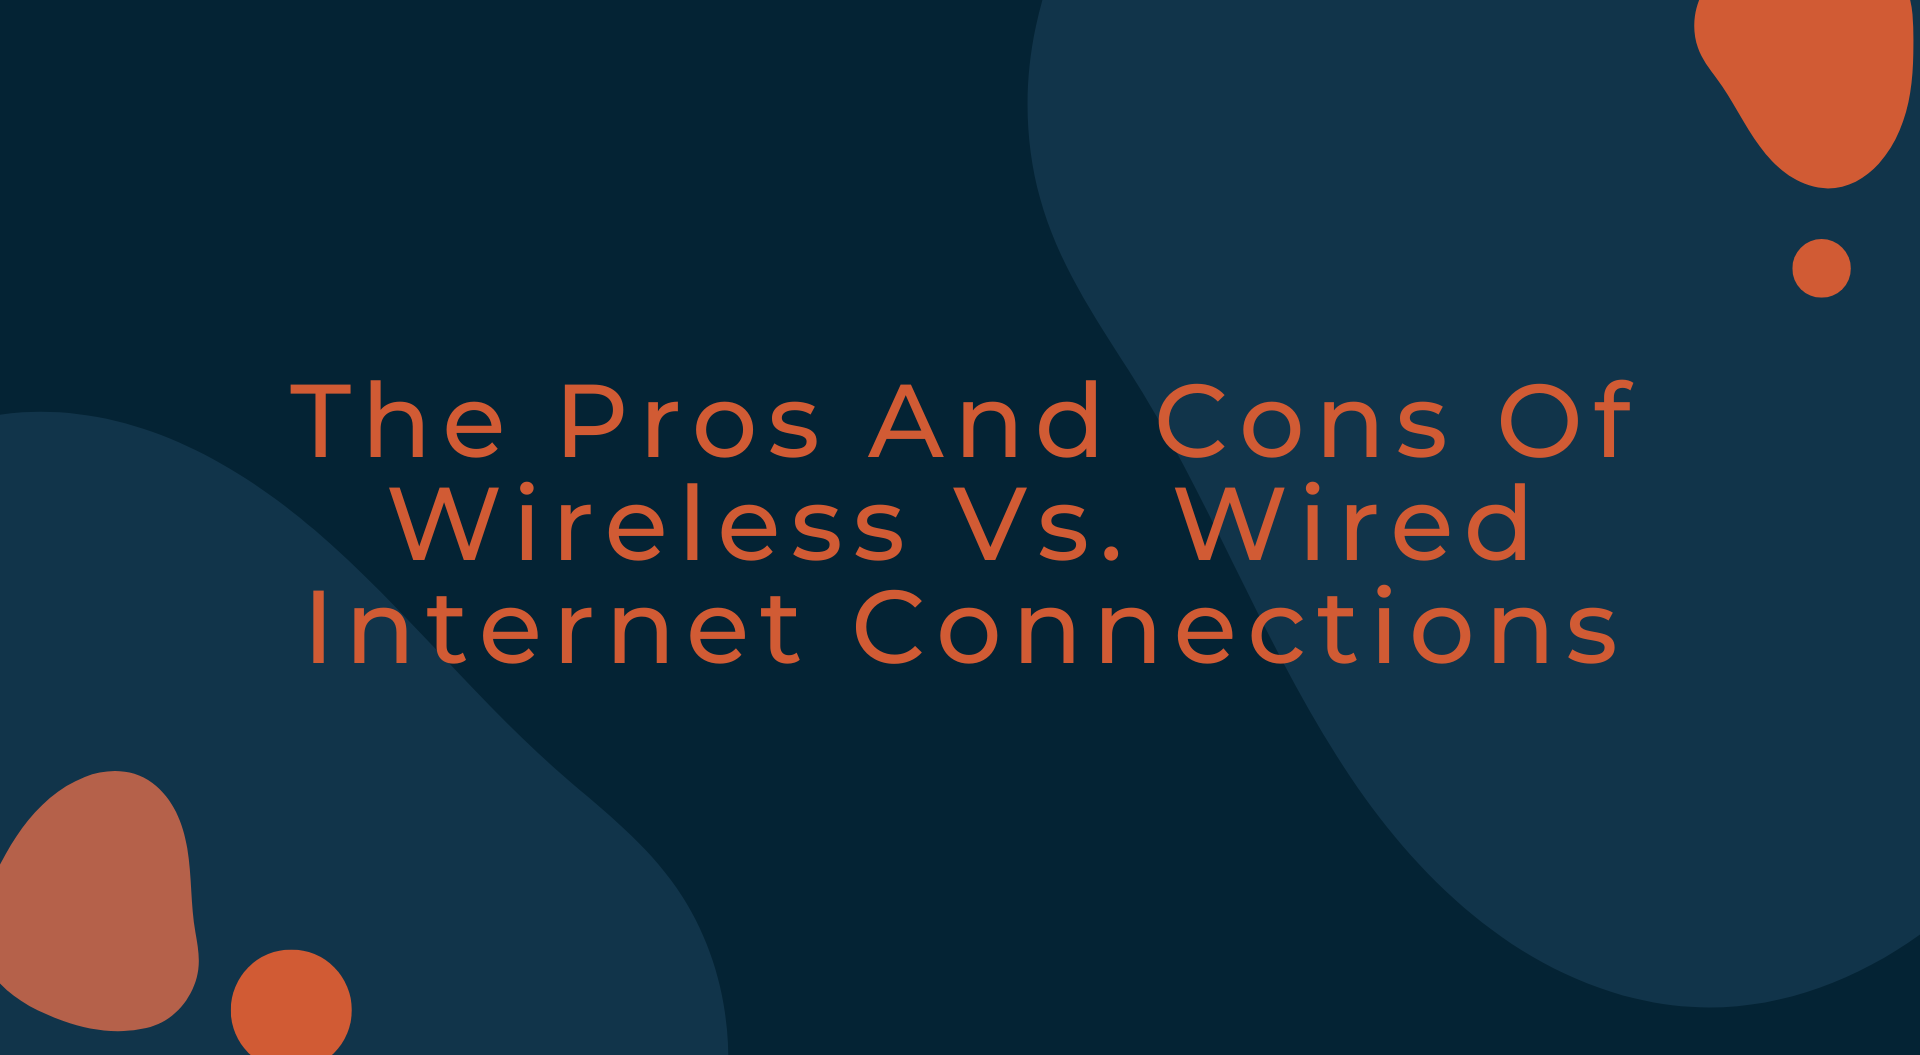 https://www.pixelemu.com/templates/yootheme/cache/55/The_Pros_And_Cons_Of_Wireless_Vs._Wired_Internet_Connections-55e556a2.png